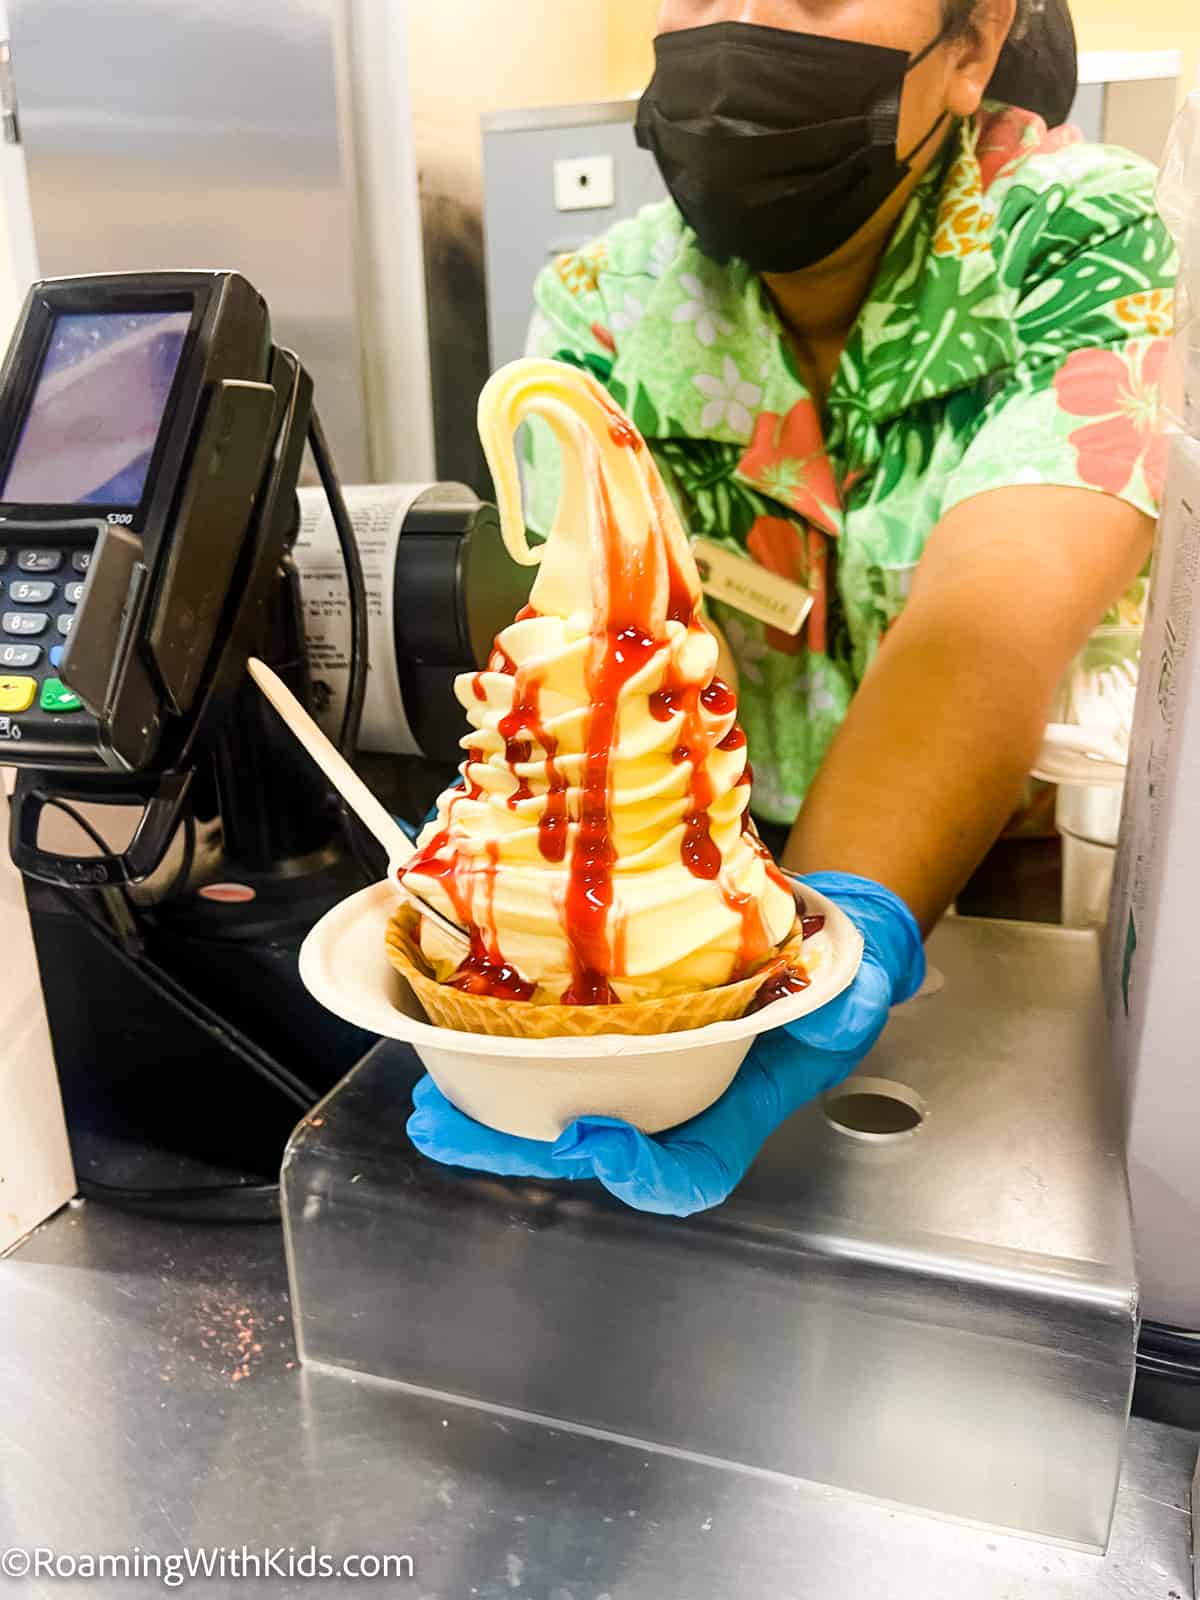 The Best Things to Do in Oahu With Kids - Dole Whip at Dole Plantation